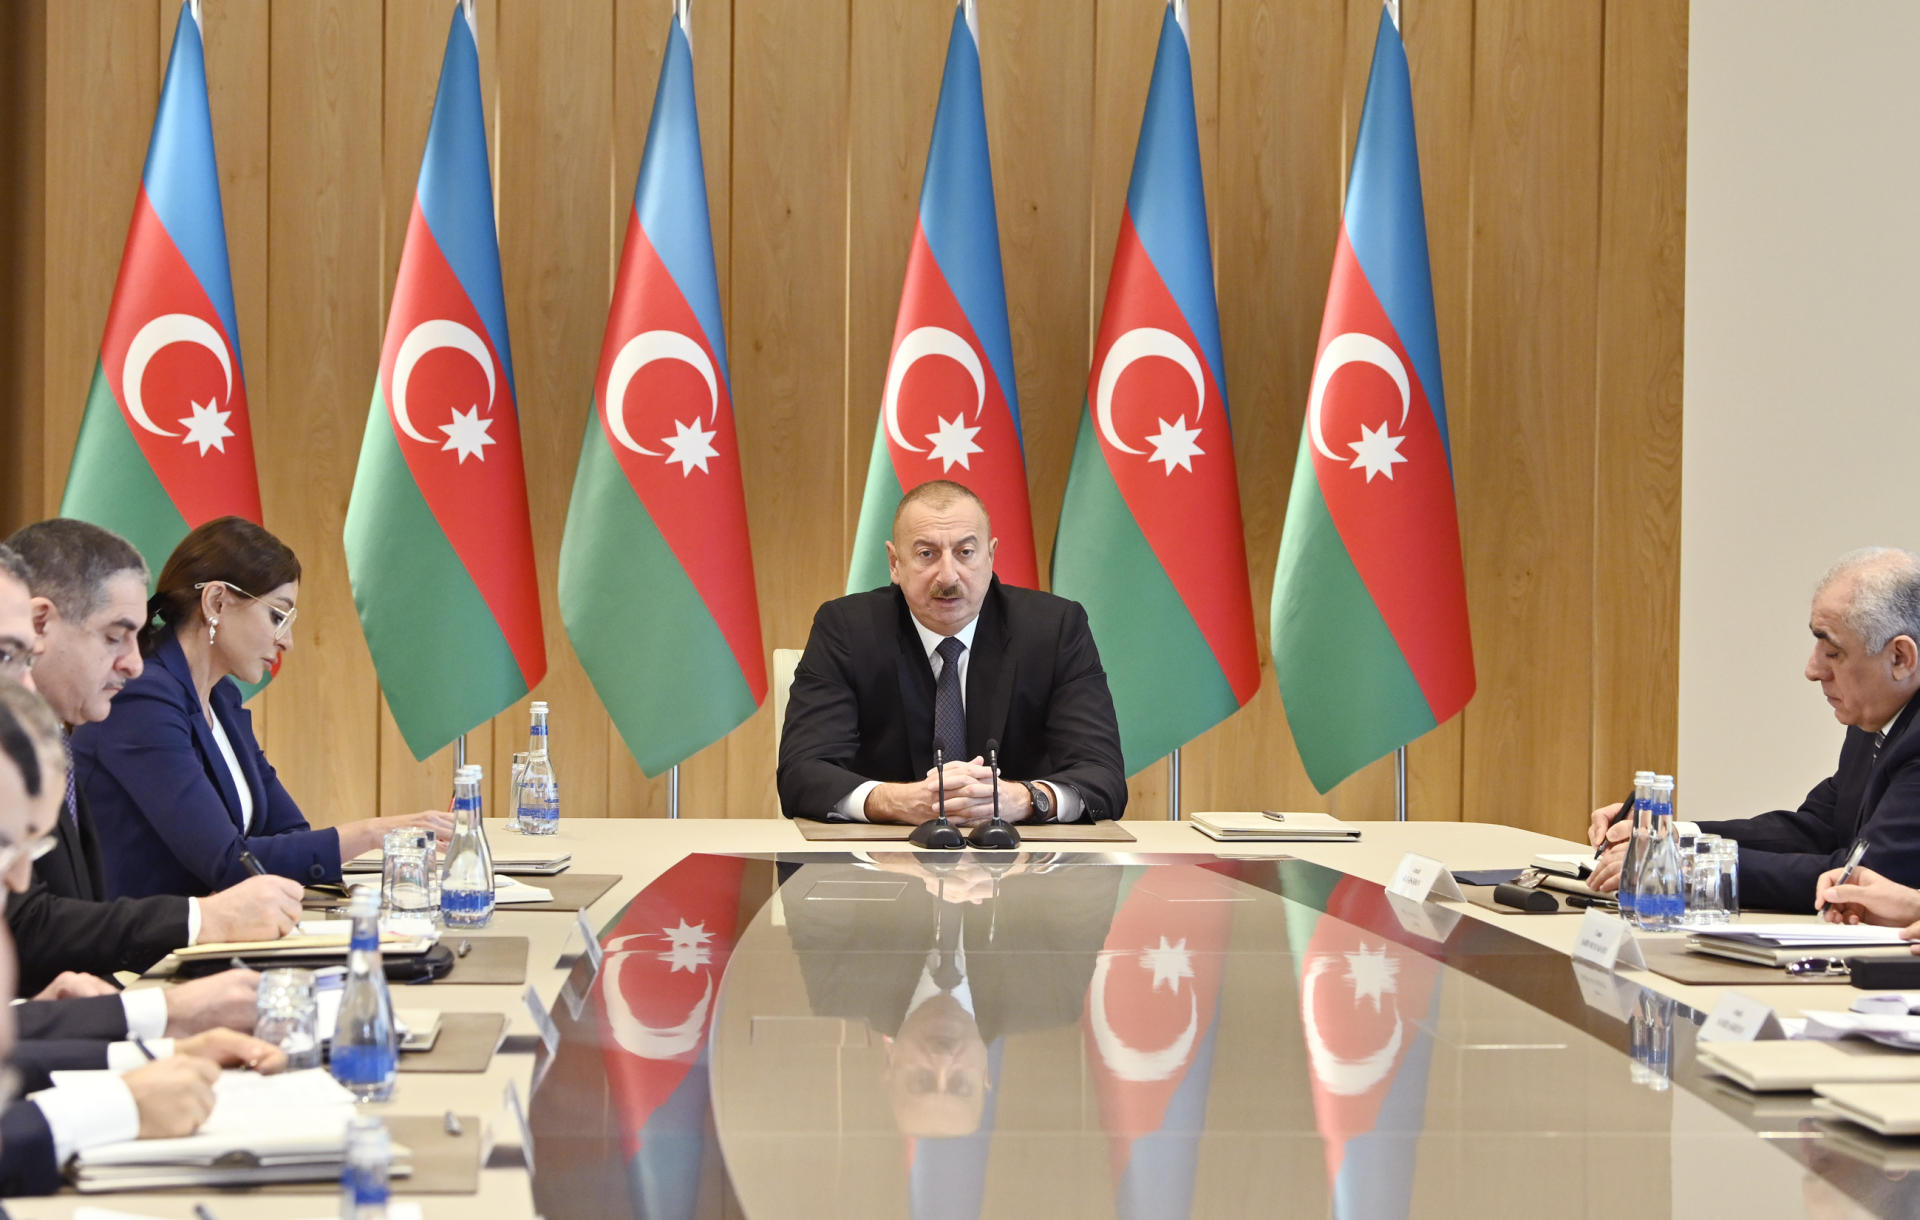 President Ilham Aliyev: Azerbaijan has passed development path equal to century and has now joined ranks of strong countries on global scale